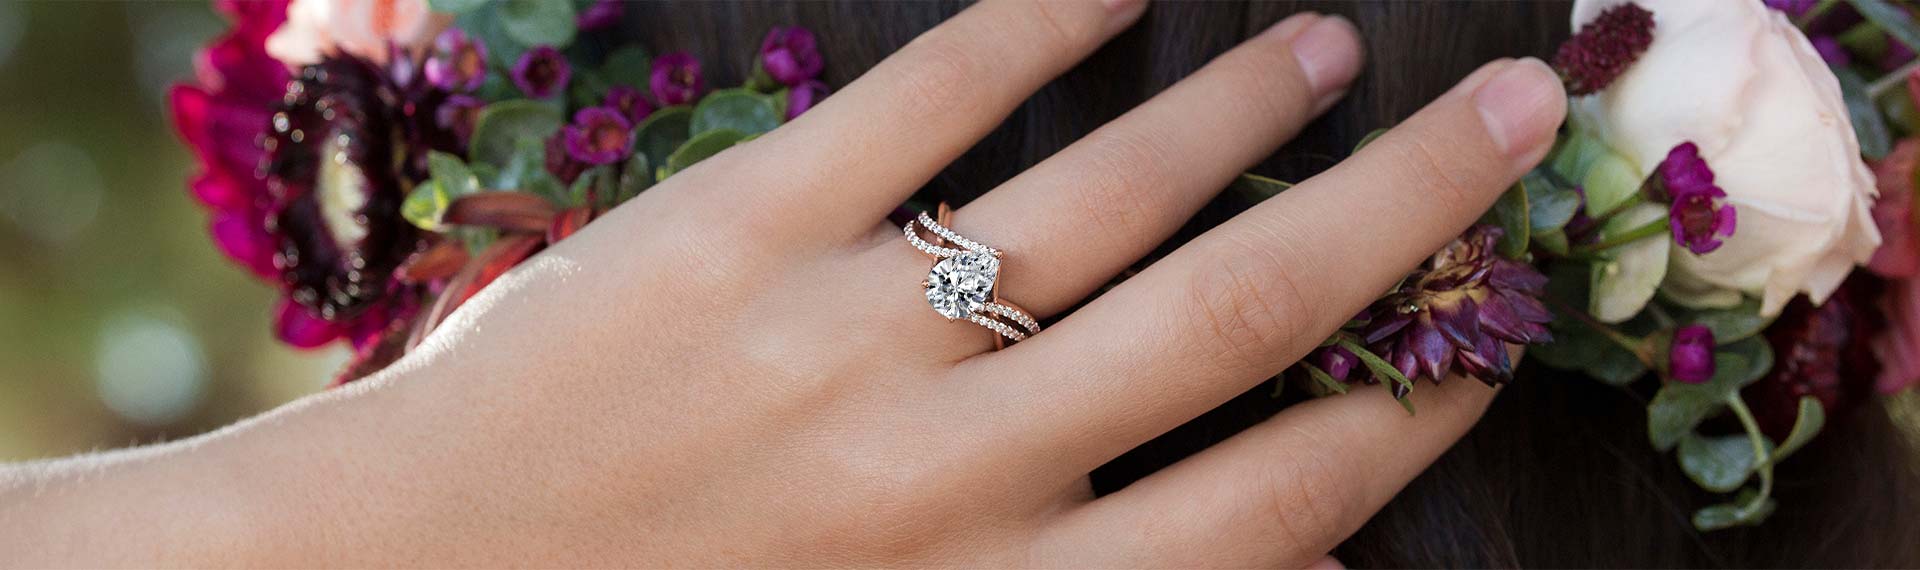 https://www.barkevs.com/public/themes/bliss/assets/images/home-page/Leading-Designer-Natural-Lab-Grown-Diamond-Engagement-Rings.jpg